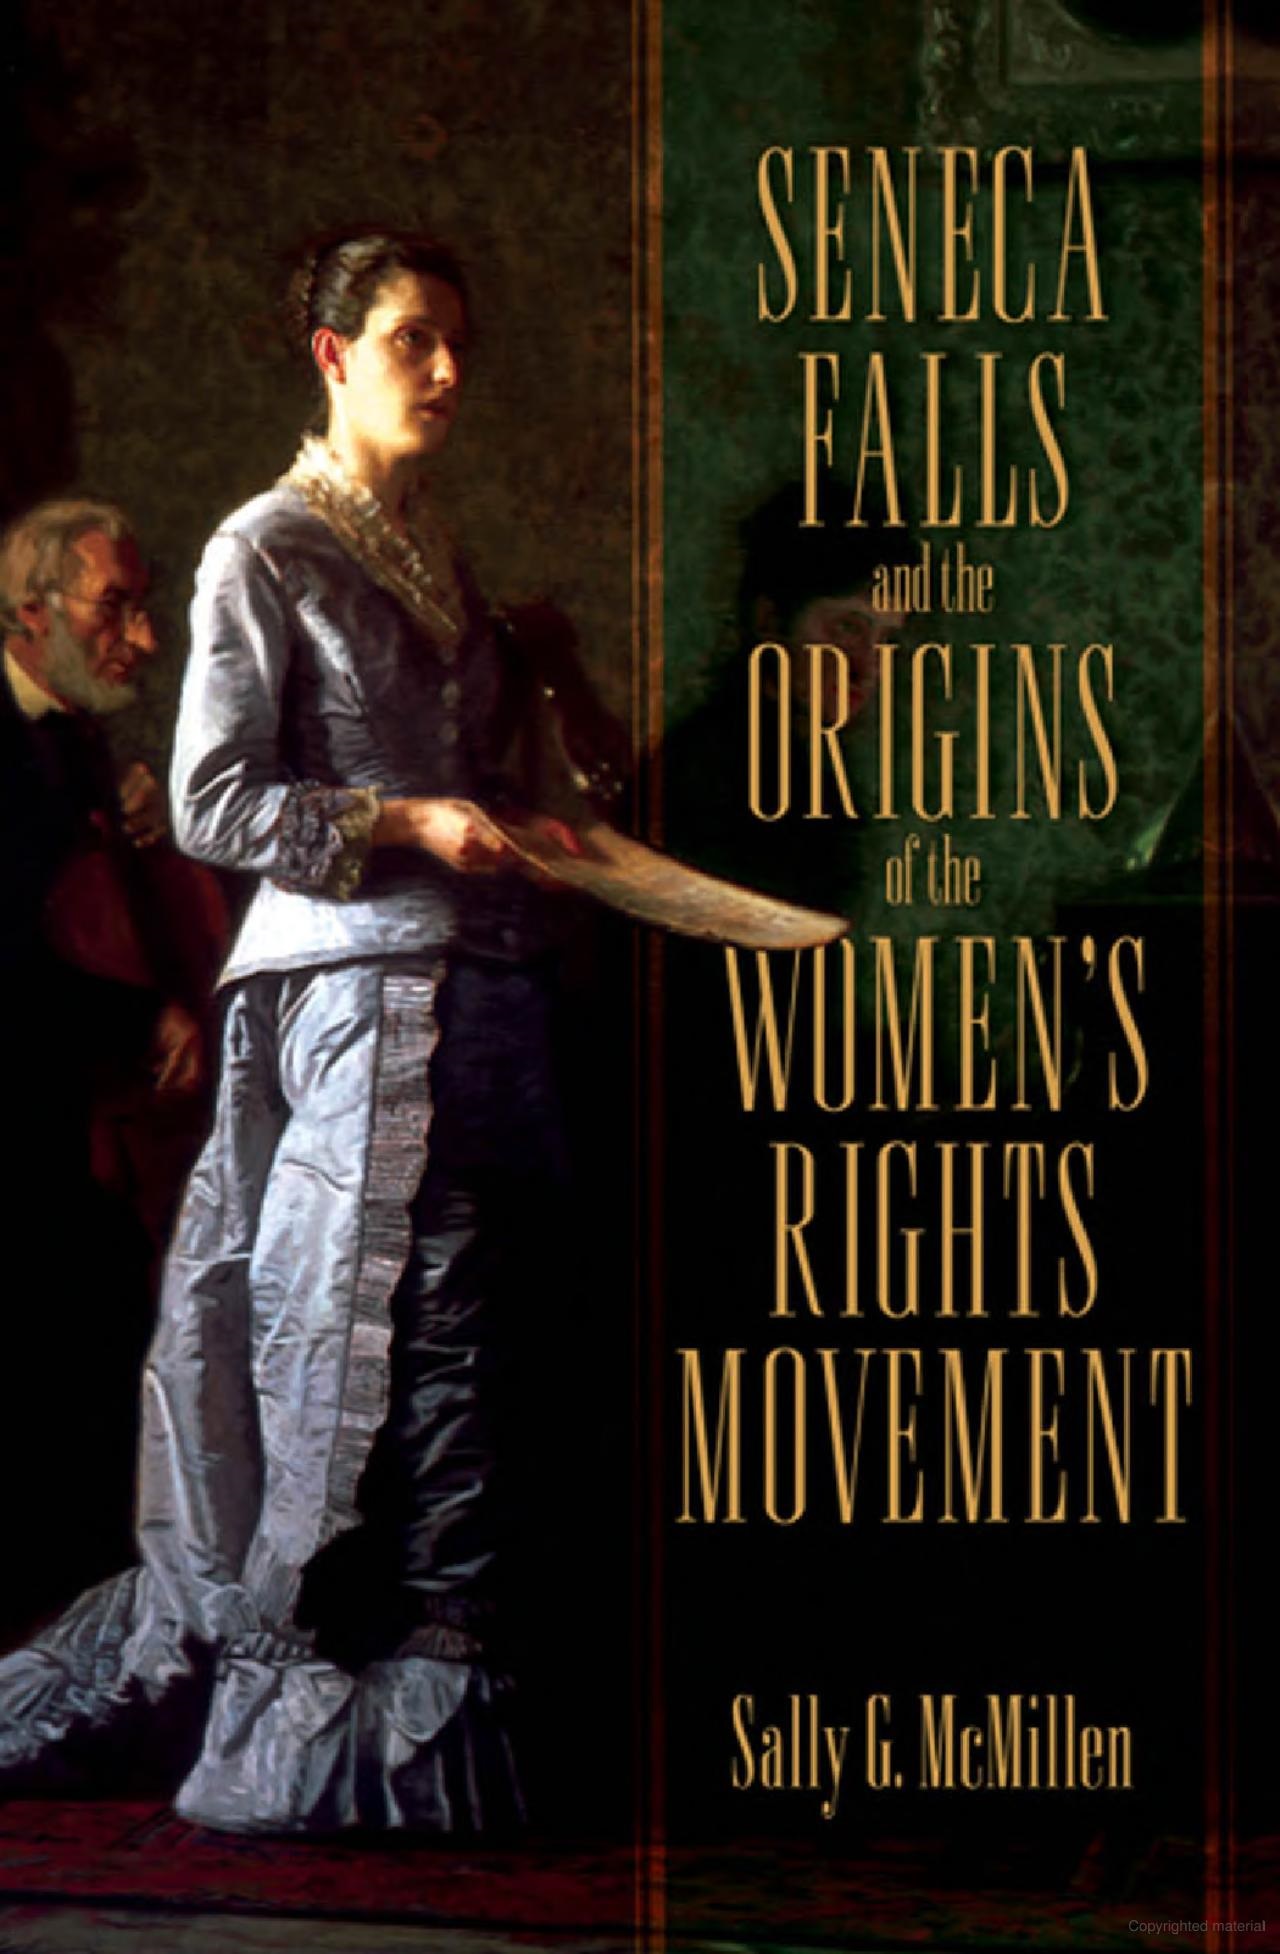 Image for "Seneca Falls and the Origins of the Women's Rights Movement"